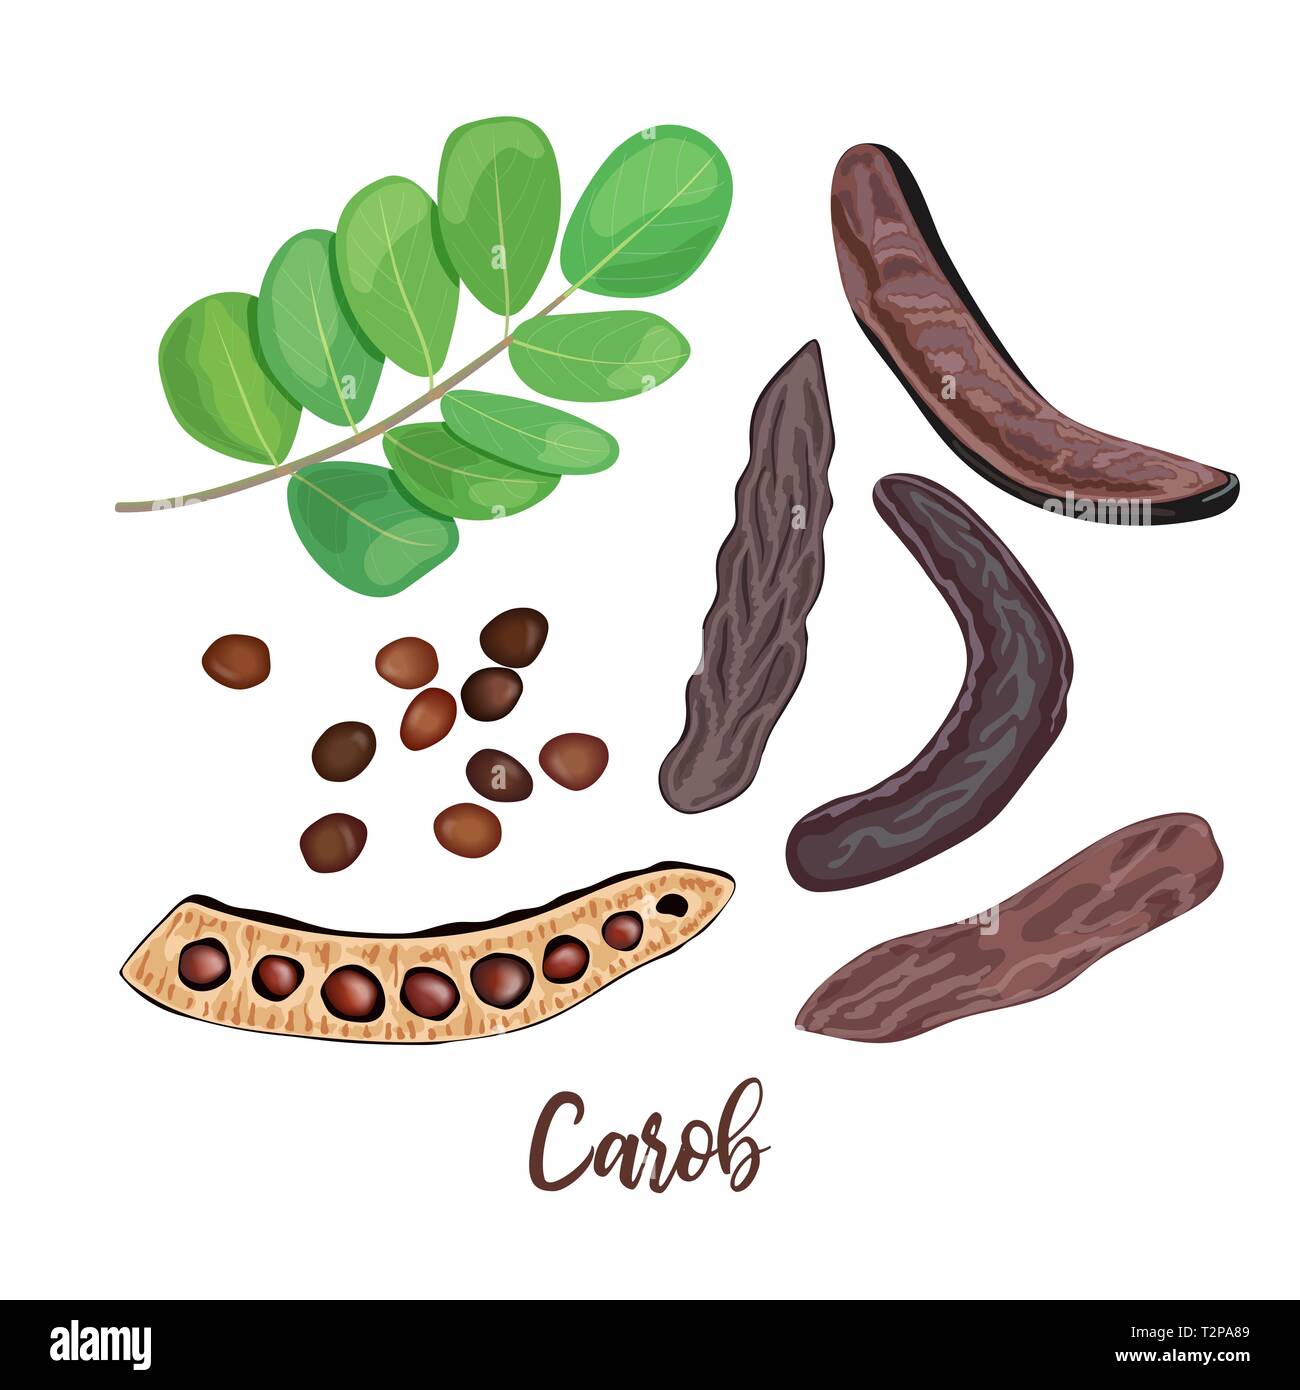 Ripe Carob sweet pods, leaves, seeds and carob powder on the white background. vector illustration. for food decoration, bakery, organic healthy food, Stock Vector